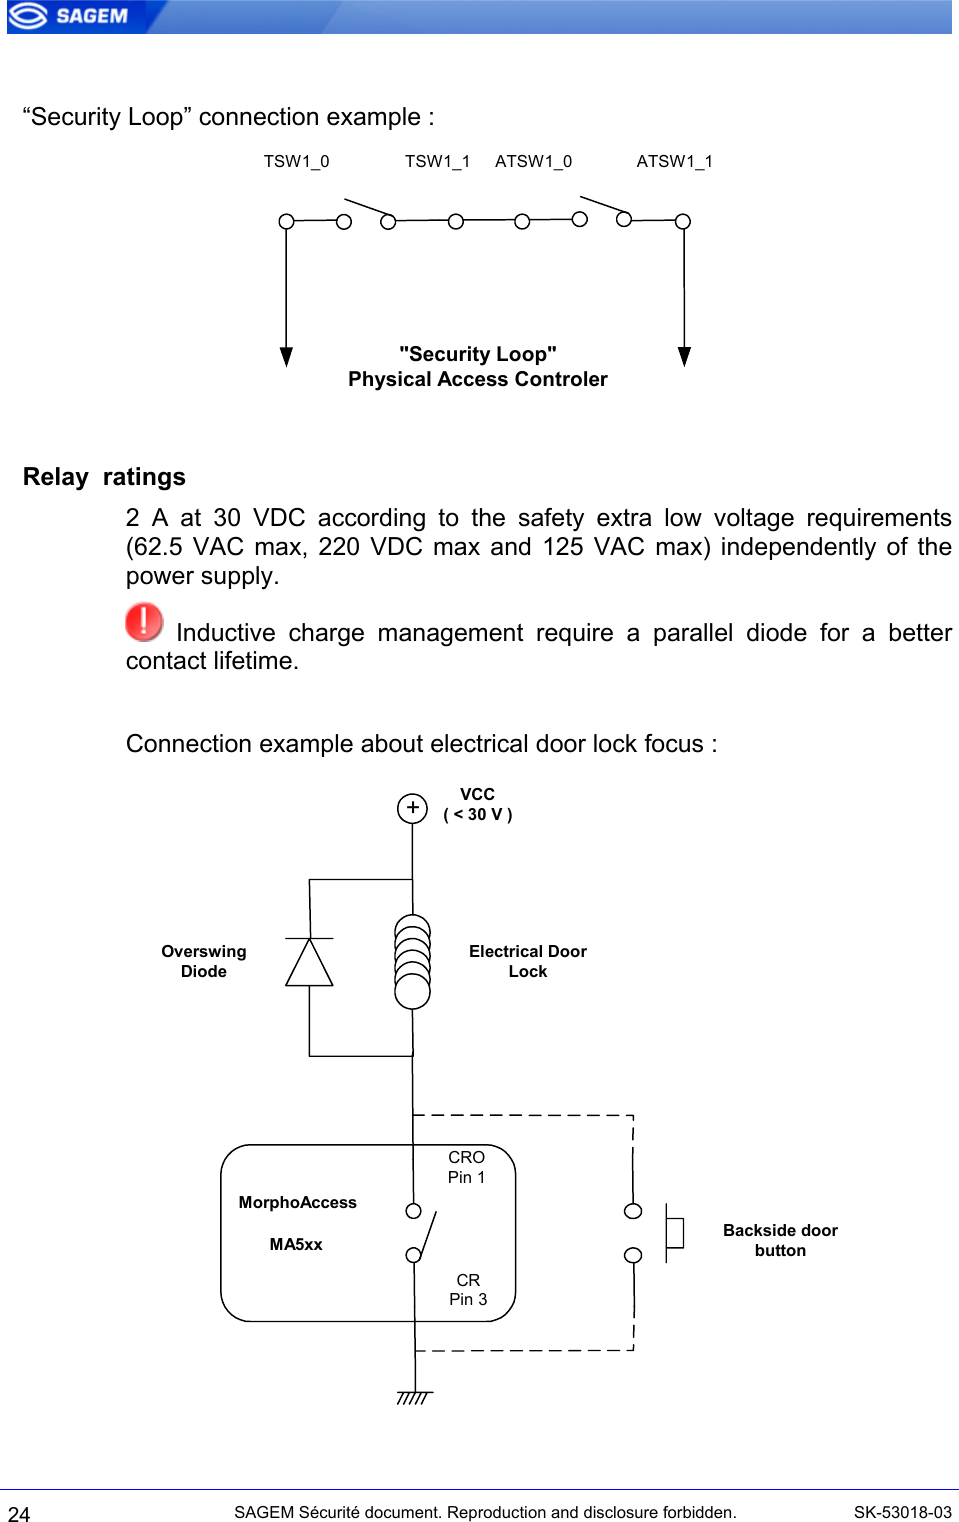   “Security Loop” connection example : TSW1_0 TSW1_1 ATSW1_0 ATSW1_1&quot;Security Loop&quot;Physical Access Controler   Relay  ratings 2 A at 30 VDC according to the safety extra low voltage requirements (62.5 VAC max, 220 VDC max and 125 VAC max) independently of the power supply.  Inductive charge management require a parallel diode for a better contact lifetime.  Connection example about electrical door lock focus : MorphoAccessMA5xxCROPin 1CRPin 3+VCC( &lt; 30 V )Electrical DoorLockOverswingDiodeBackside doorbutton 24 SAGEM Sécurité document. Reproduction and disclosure forbidden.  SK-53018-03 